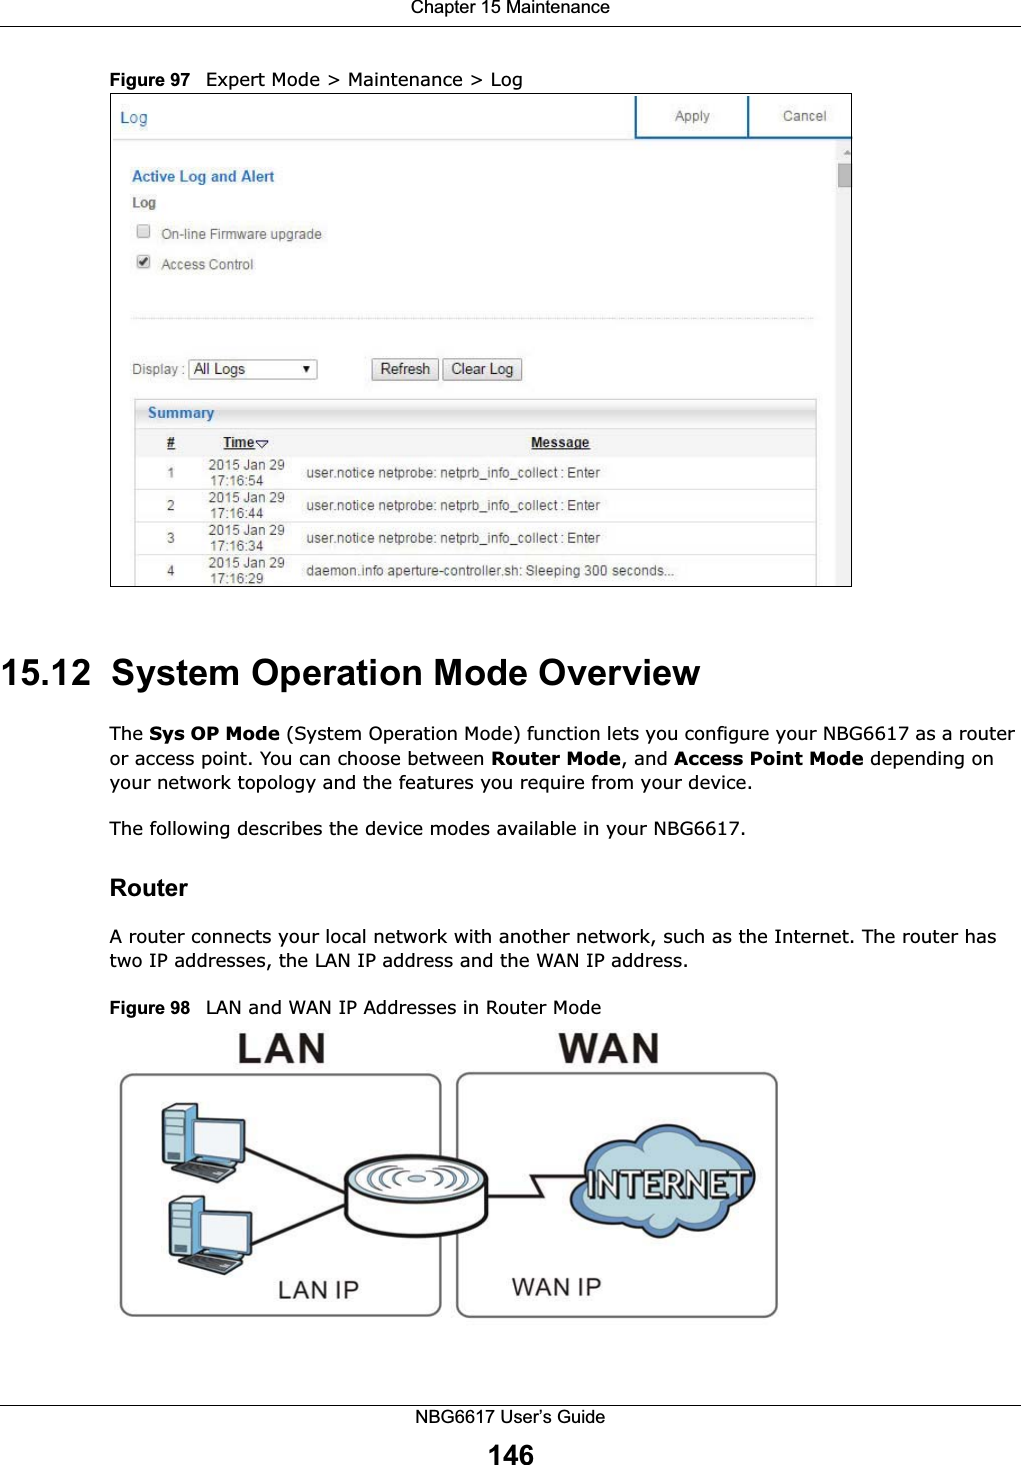 Chapter 15 MaintenanceNBG6617 User’s Guide146Figure 97   Expert Mode &gt; Maintenance &gt; Log 15.12  System Operation Mode OverviewThe Sys OP Mode (System Operation Mode) function lets you configure your NBG6617 as a router or access point. You can choose between Router Mode, and Access Point Mode depending on your network topology and the features you require from your device. The following describes the device modes available in your NBG6617.RouterA router connects your local network with another network, such as the Internet. The router has two IP addresses, the LAN IP address and the WAN IP address.Figure 98   LAN and WAN IP Addresses in Router Mode